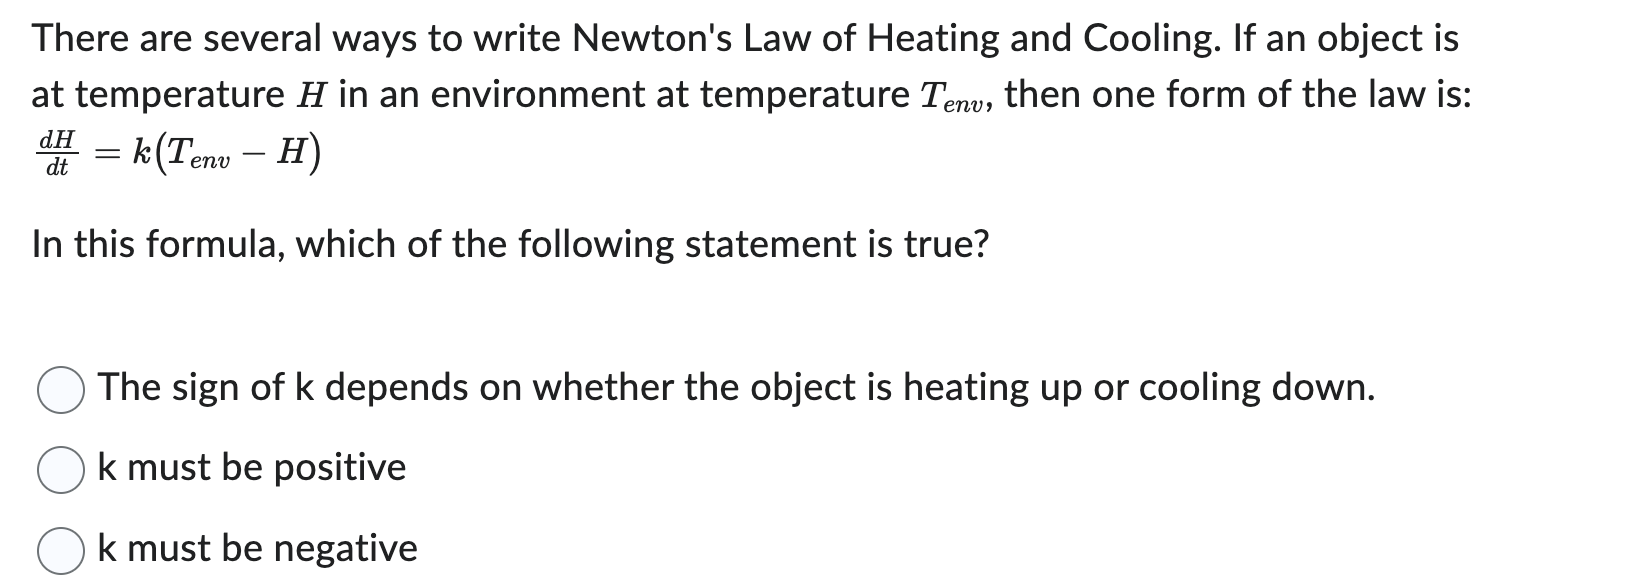 There are several ways to write Newton's Law of Heating and Cooling. If an object is
at temperature H in an environment at temperature Tenu, then one form of the law is:
= k(Tenv – H)
dH
-
dt
In this formula, which of the following statement is true?
The sign of k depends on whether the object is heating up or cooling down.
k must be positive
k must be negative